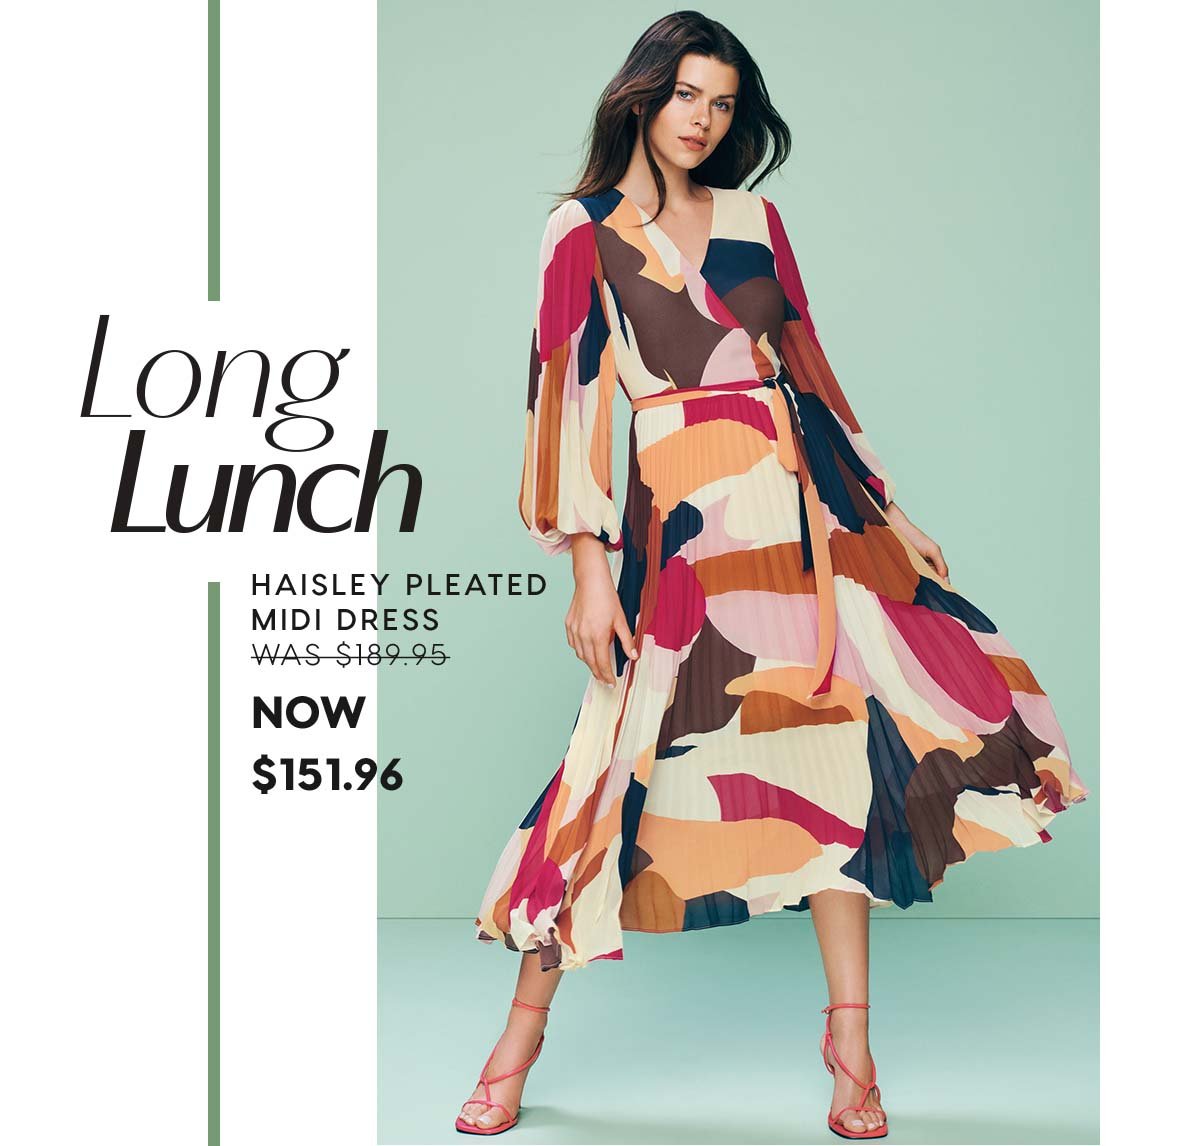 Long Lunch. Haisley Pleated Midi Dress WAS $189.95 NOW  $151.96